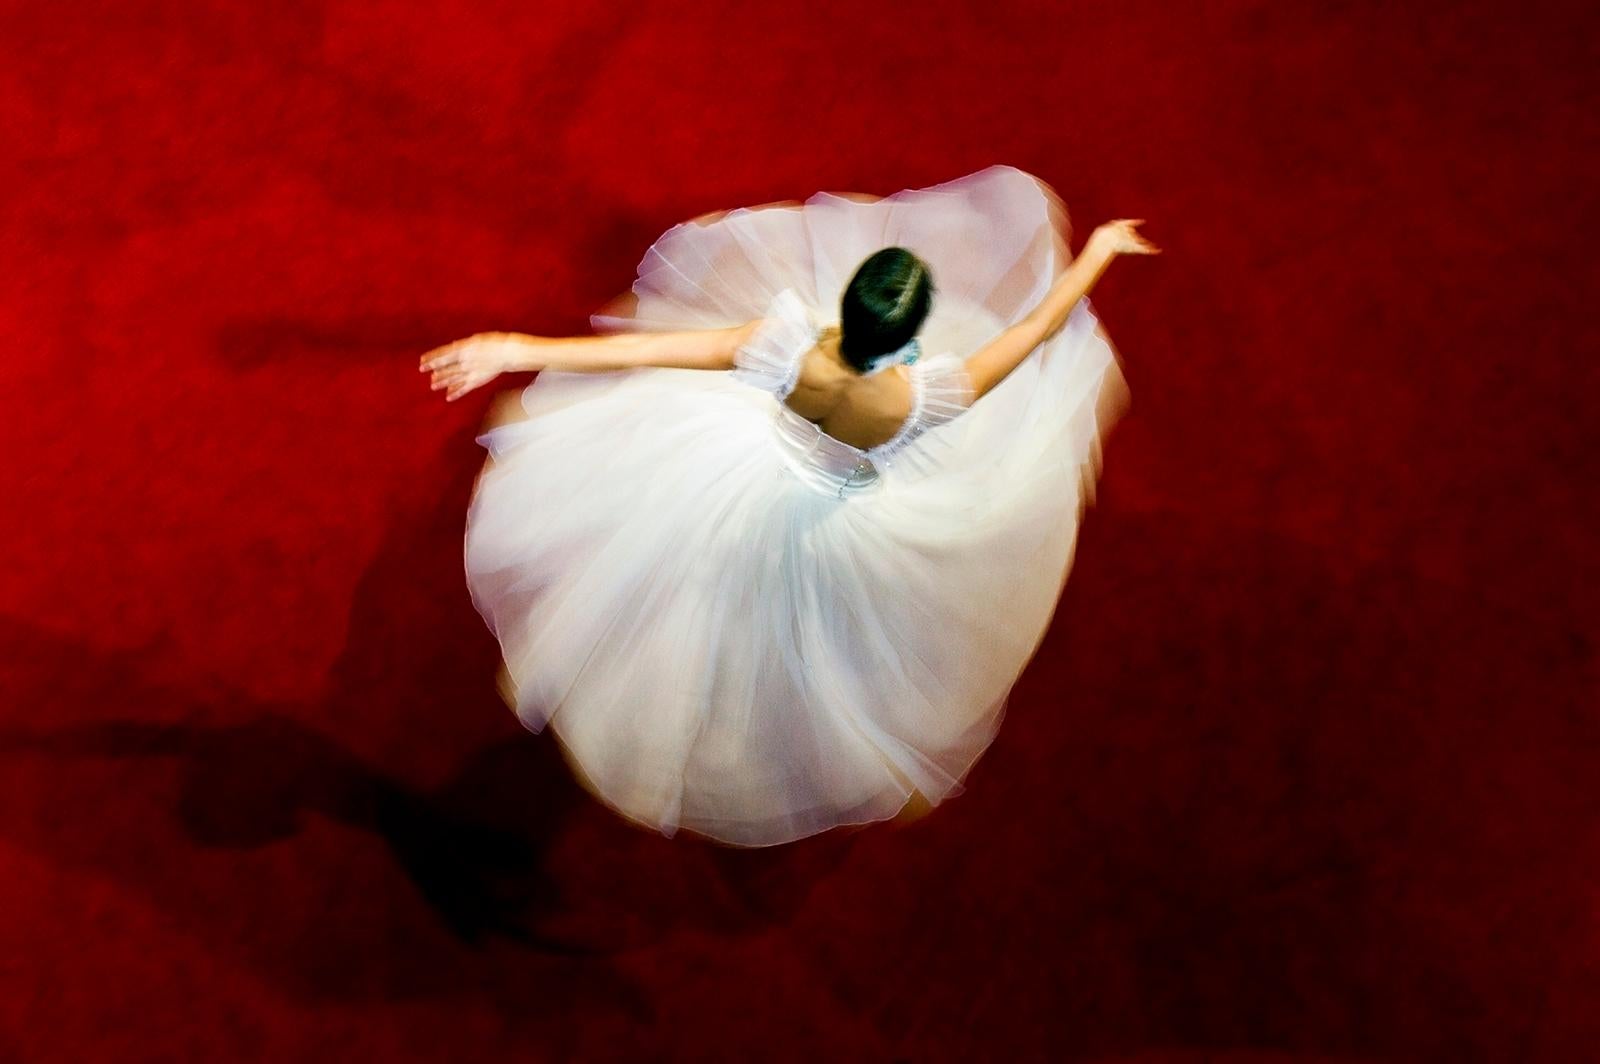 Dancer- Signed limited edition still life print, Color photo, Large scale, Dance - Contemporary Photograph by Ian Sanderson